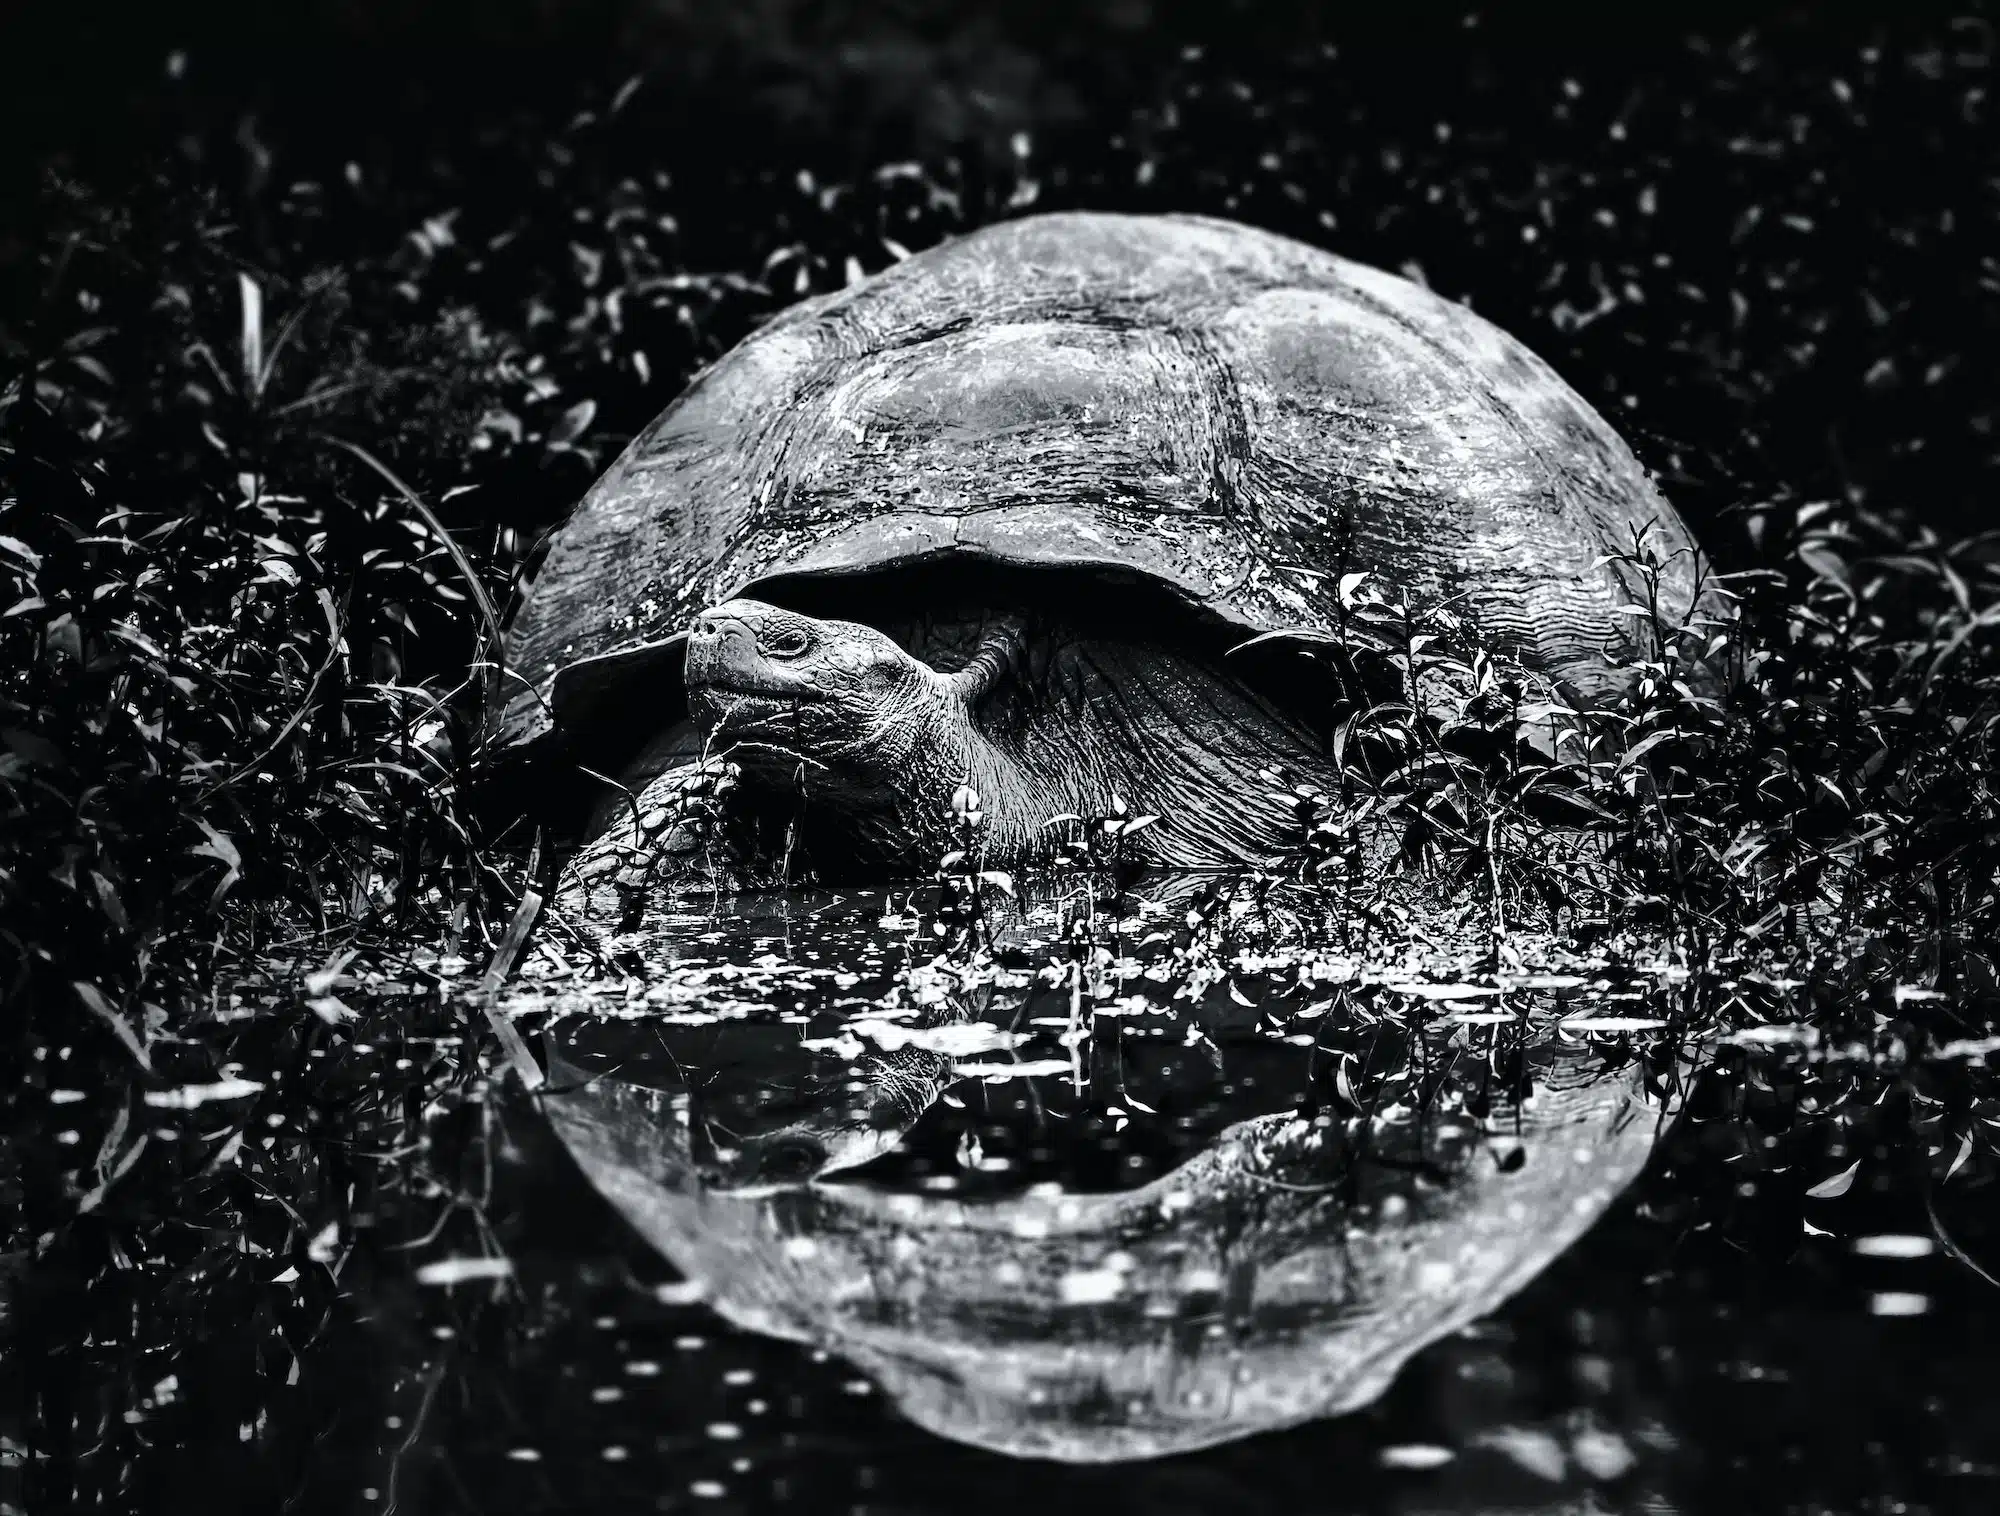 A large Galapagos tortoise in splashing water, a reflection of its shell in the water surface.